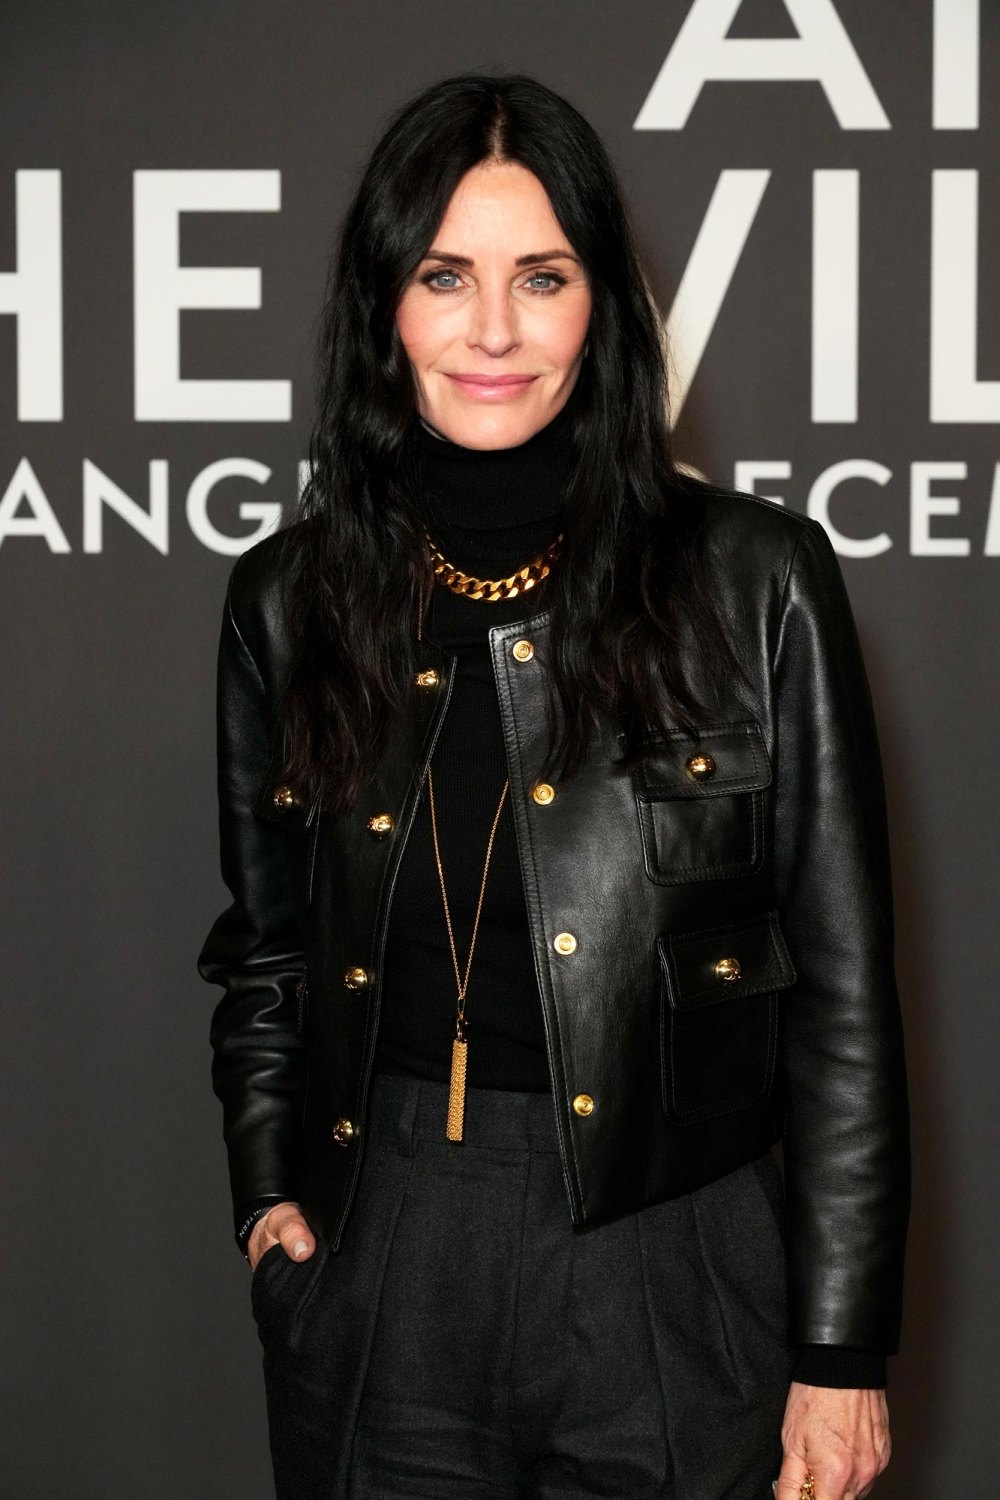 Courtney Cox Is In Talks to Follow Neve Campbell in Return to Scream Franchise